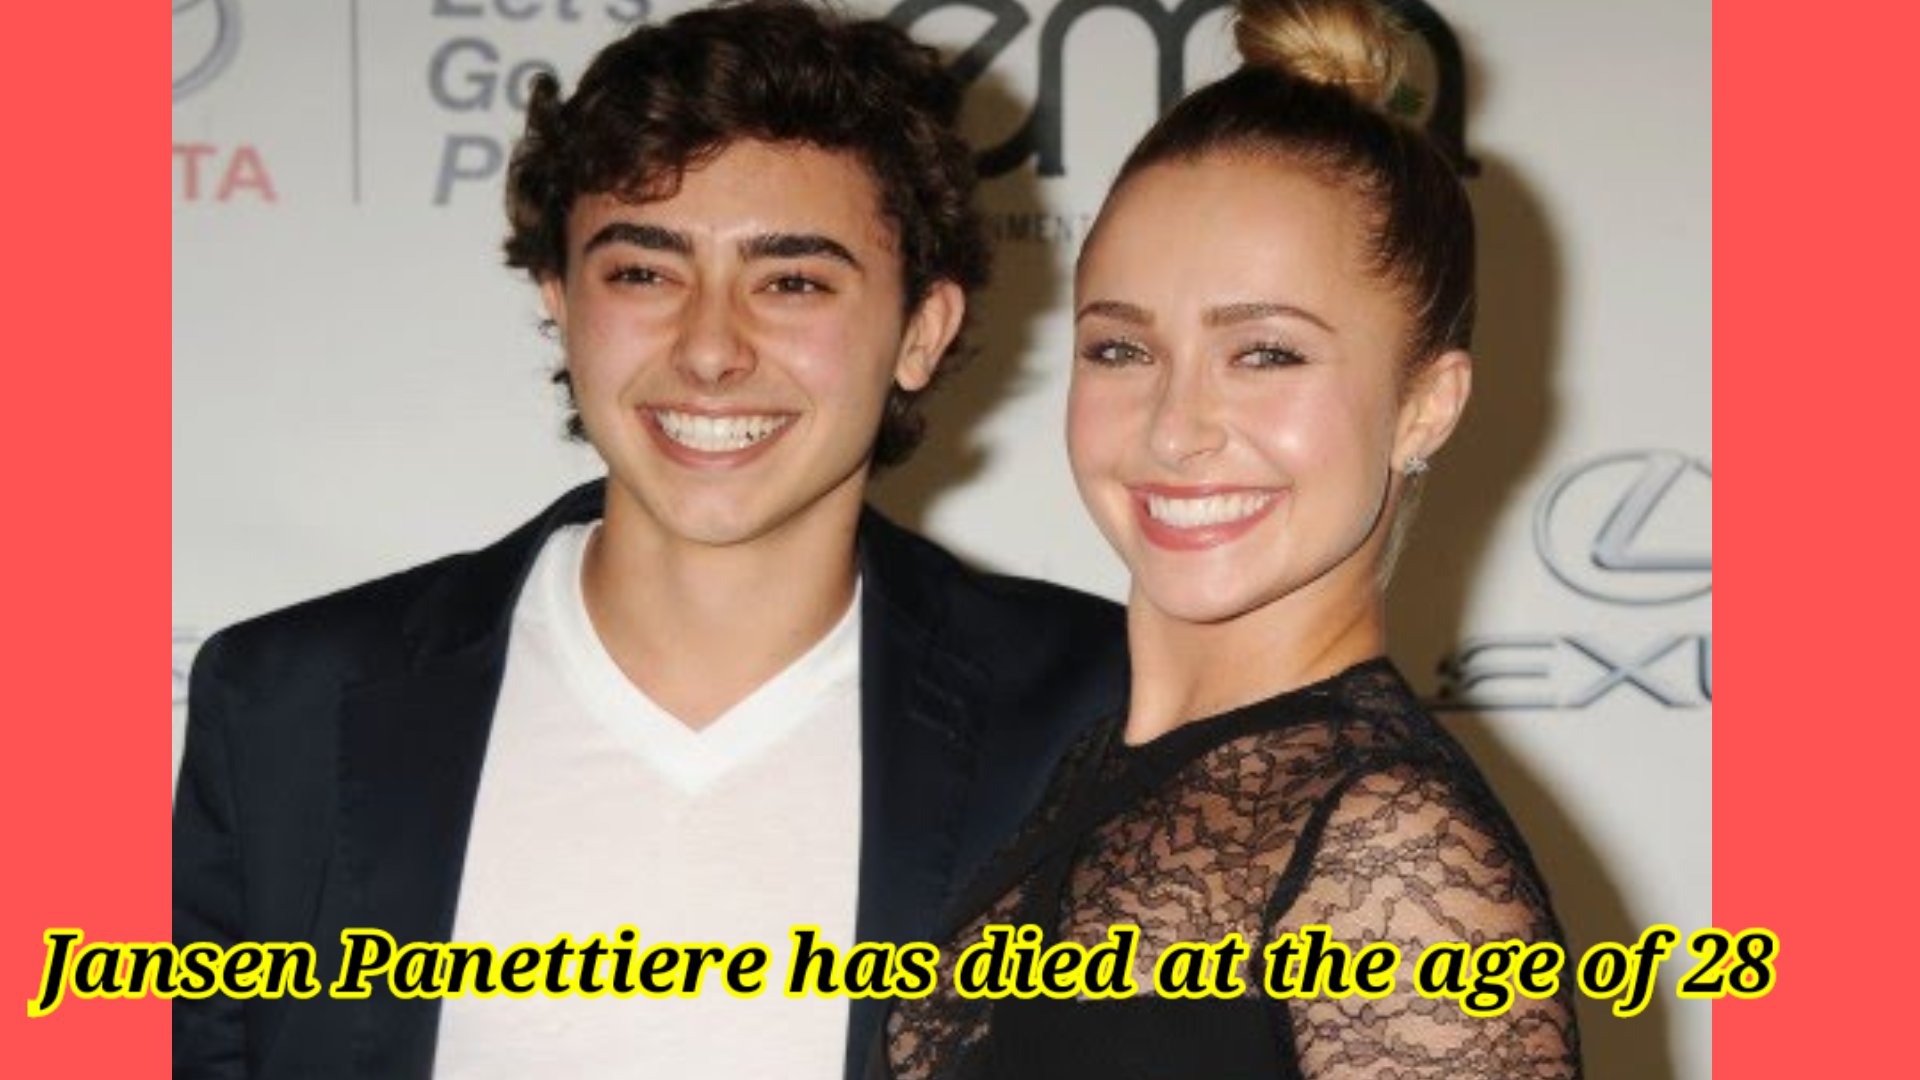 Jansen Panettiere has died at the age of 28: Hayden Panettiere’s brother Jansen, star of The Walking Dead